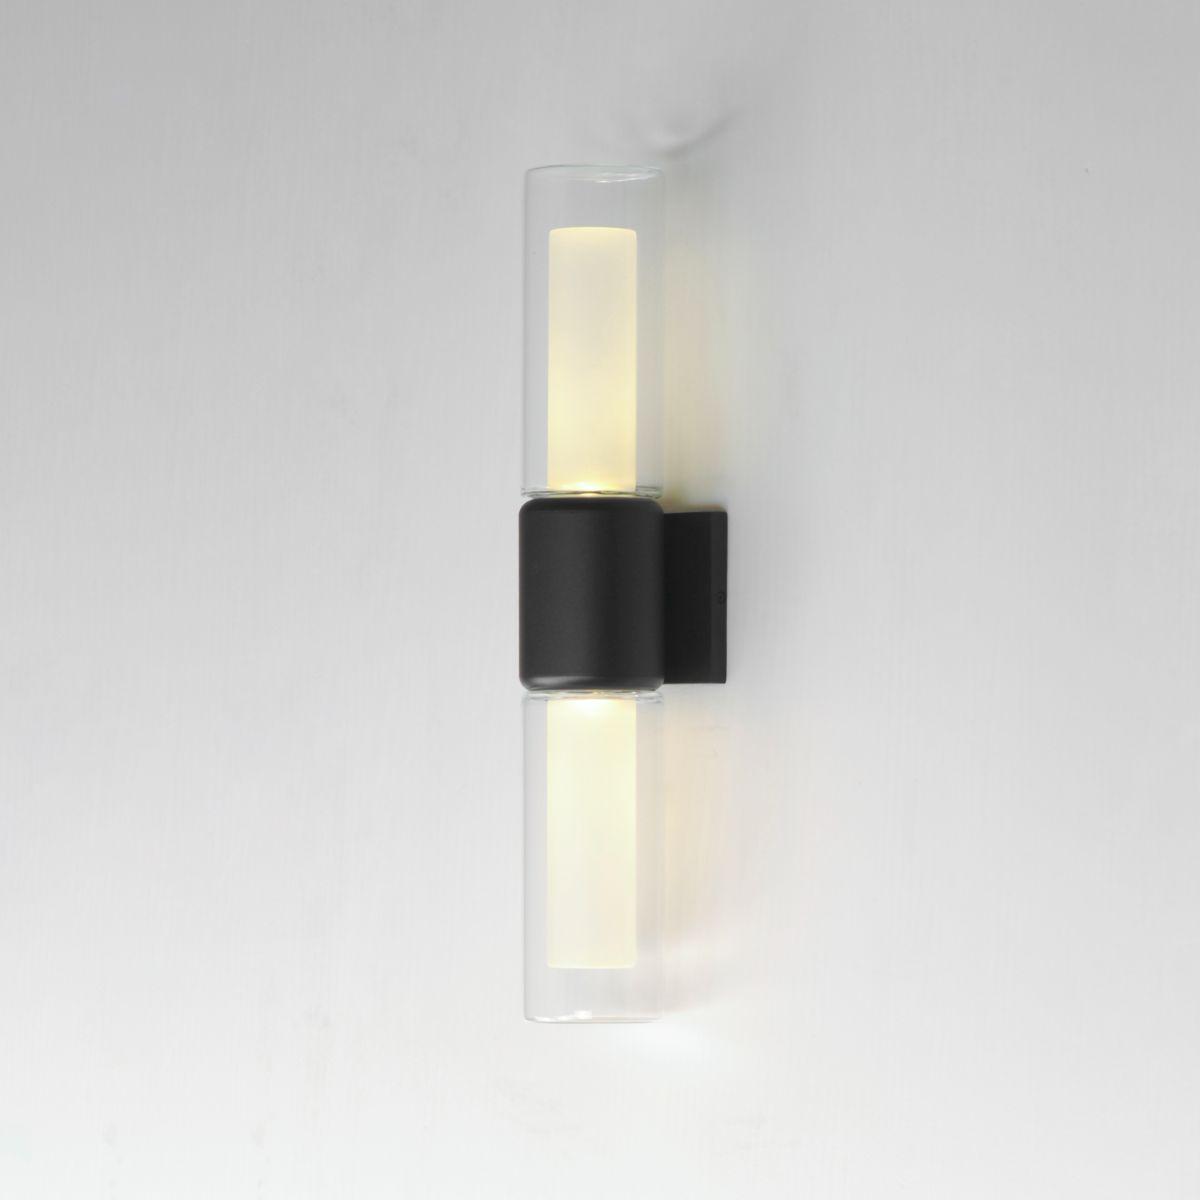 Dram 23 in. 2 Lights LED Outdoor Wall Sconce Black Finish